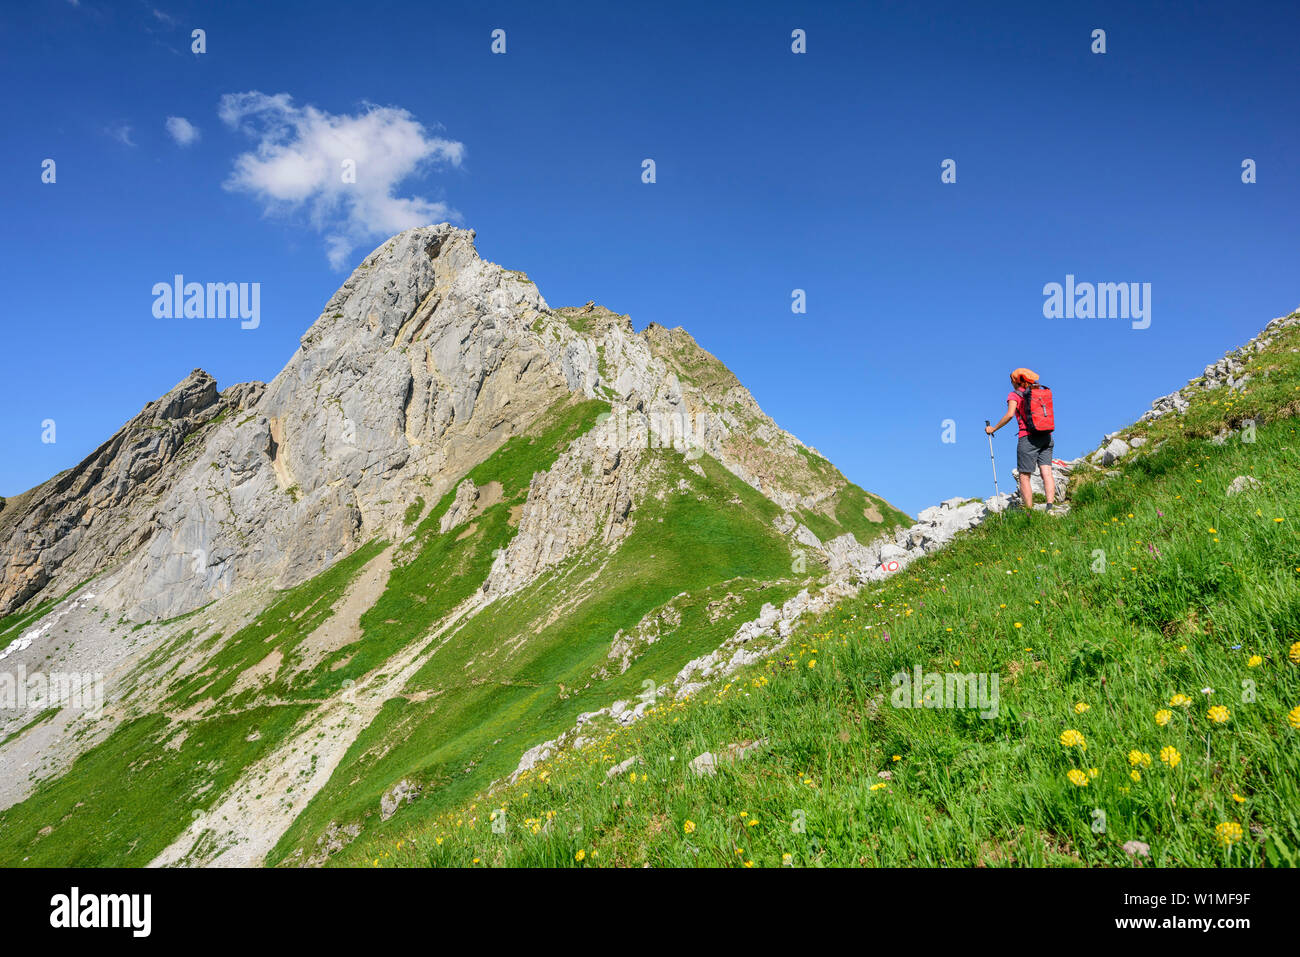 Woman hiking through meadow with flowers, rock spire in background, Lechtal Alps, Tyrol, Austria Stock Photo